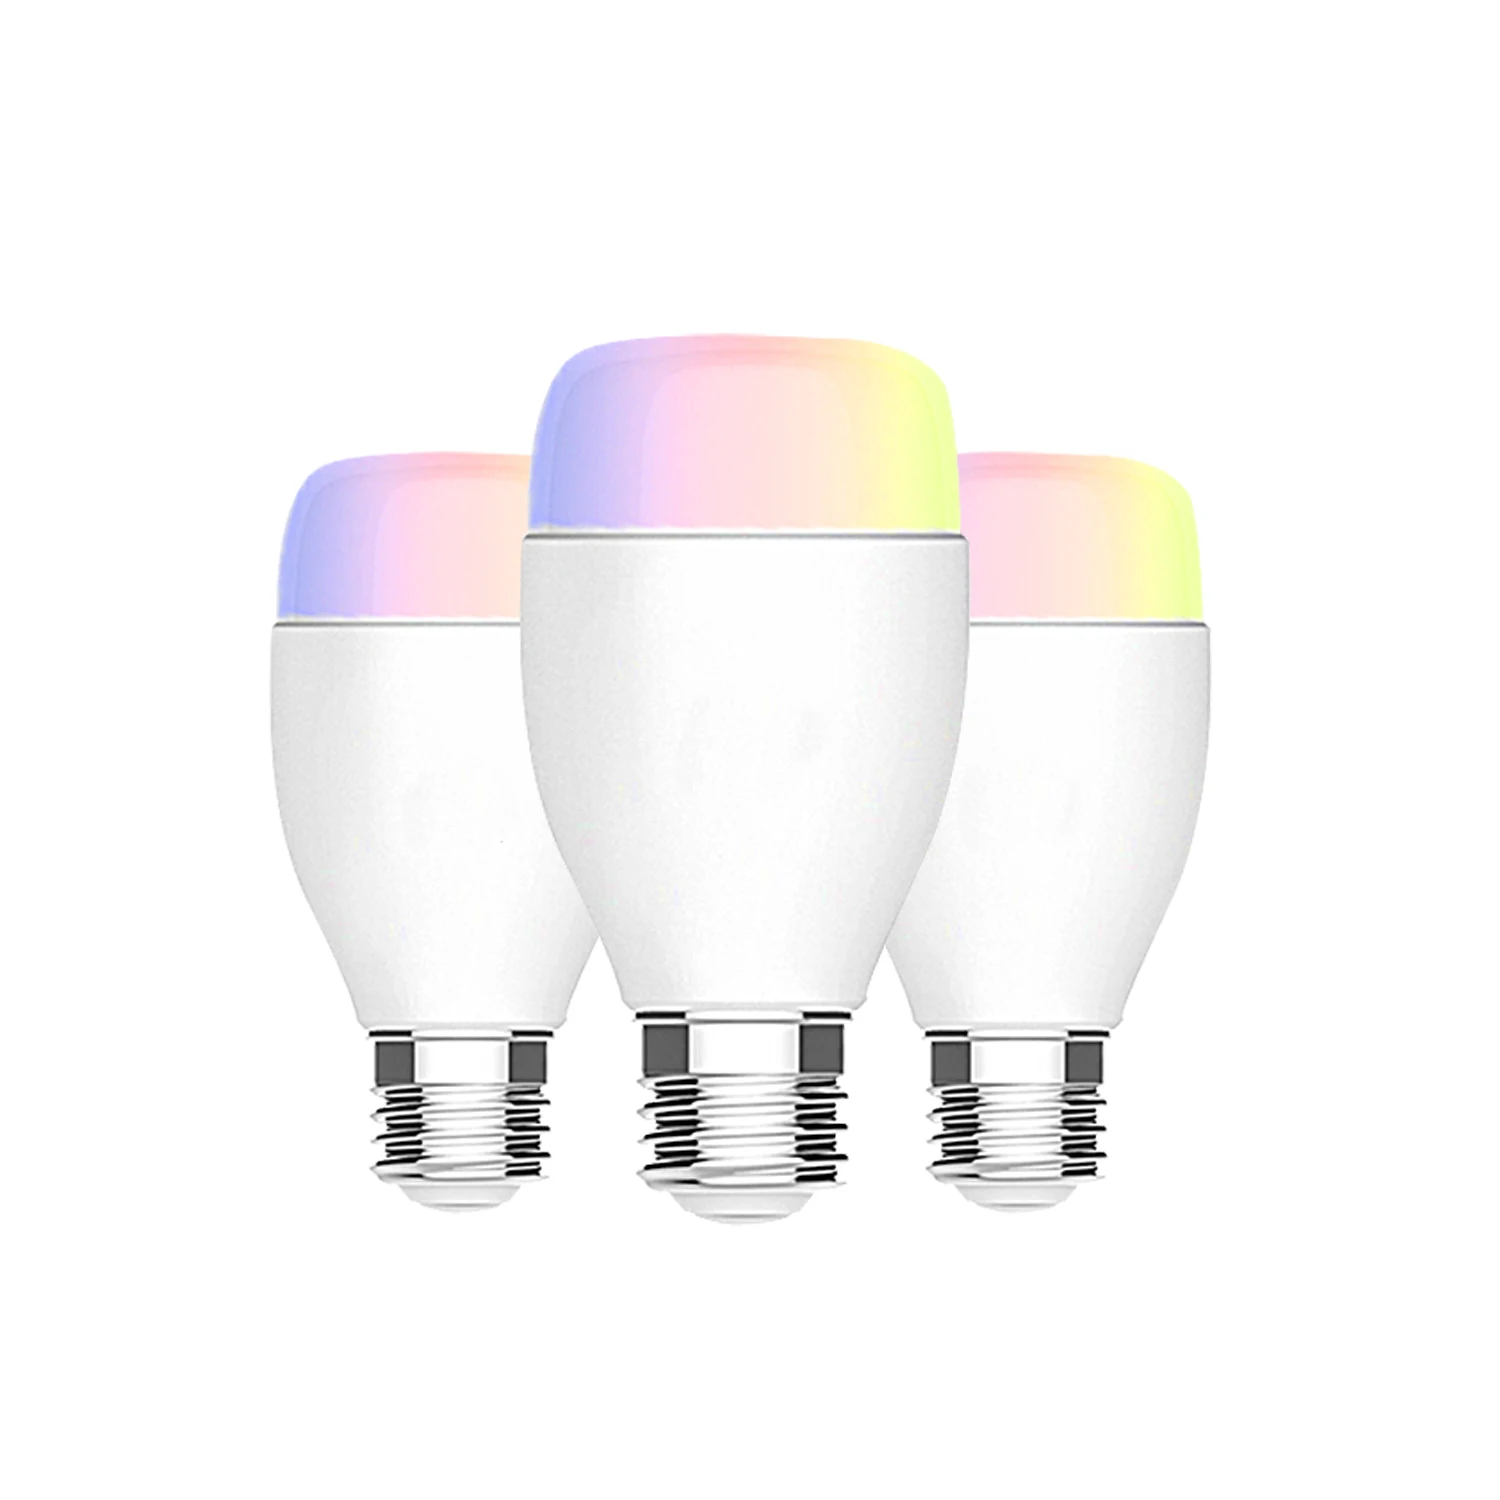 Home automation, compatible with smart LED bulbs from Google and Amazon